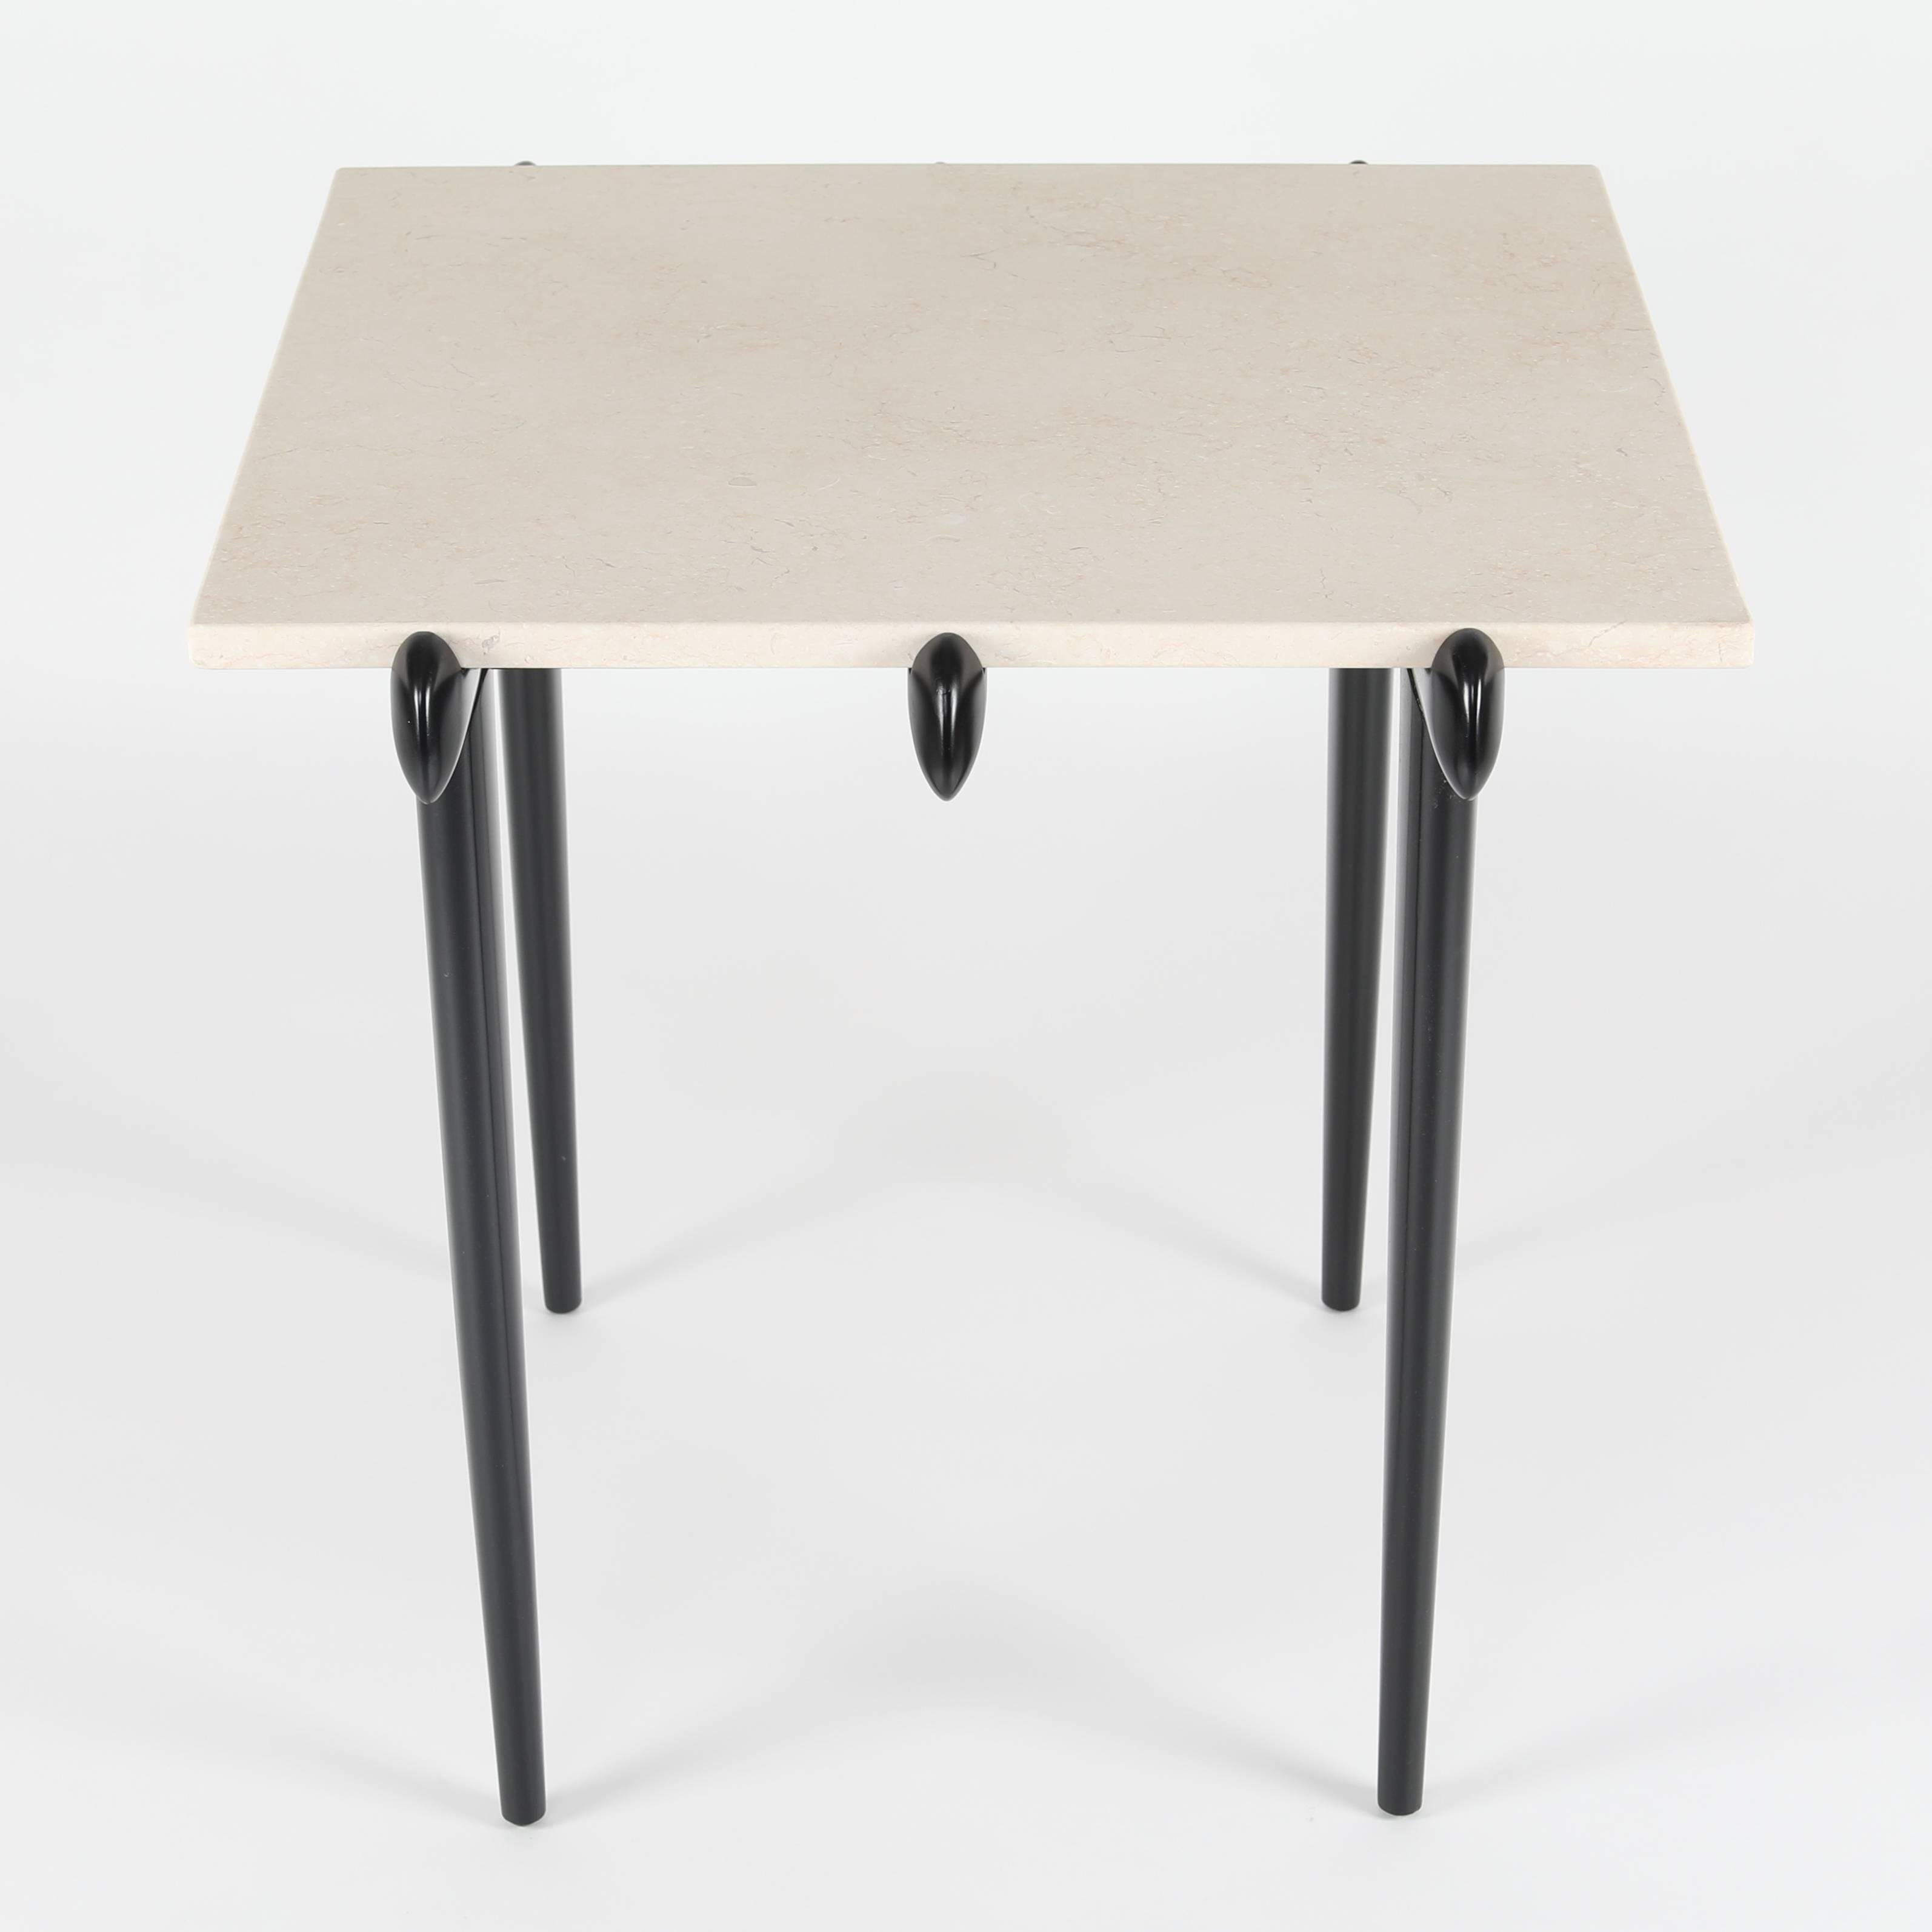 A fine pair of sculptural 1950s Italian end tables featuring four tapered legs leading to six 